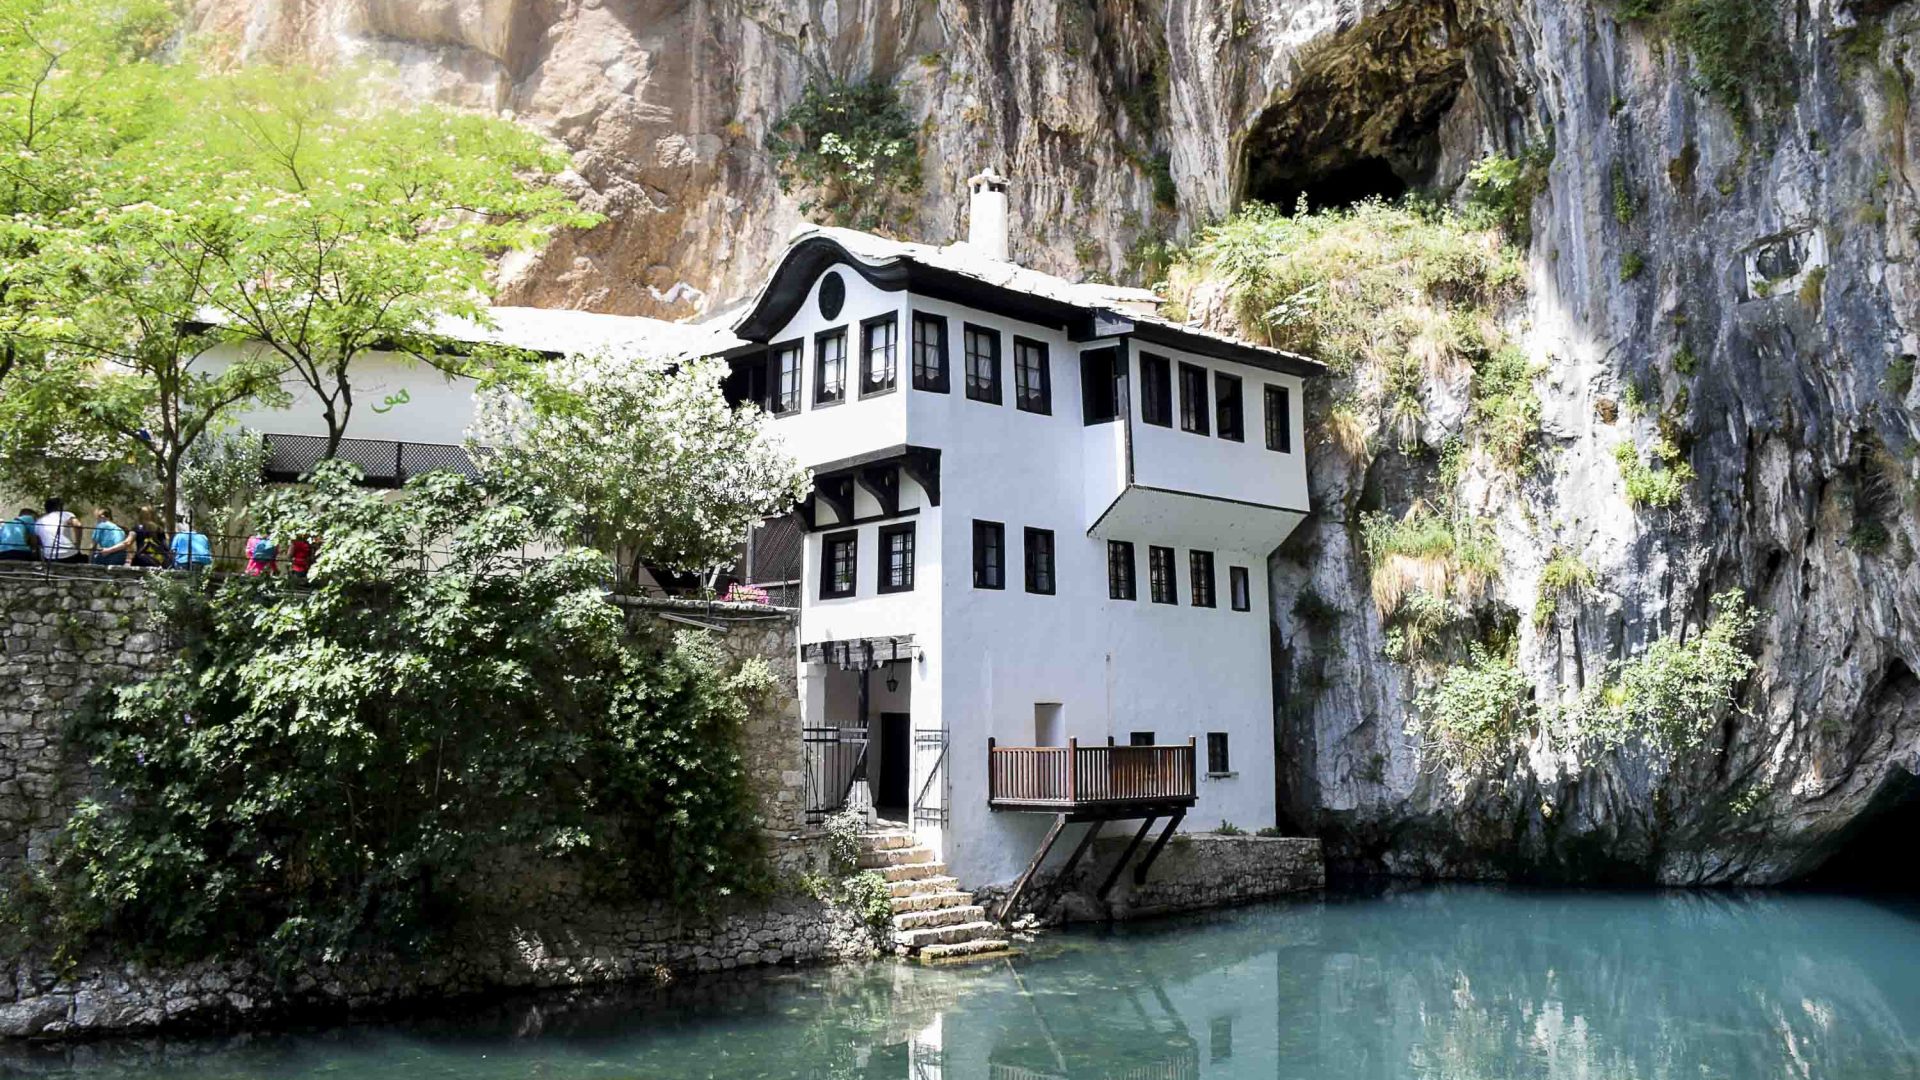 A multi-story white building sits on the very edge of a blue river.